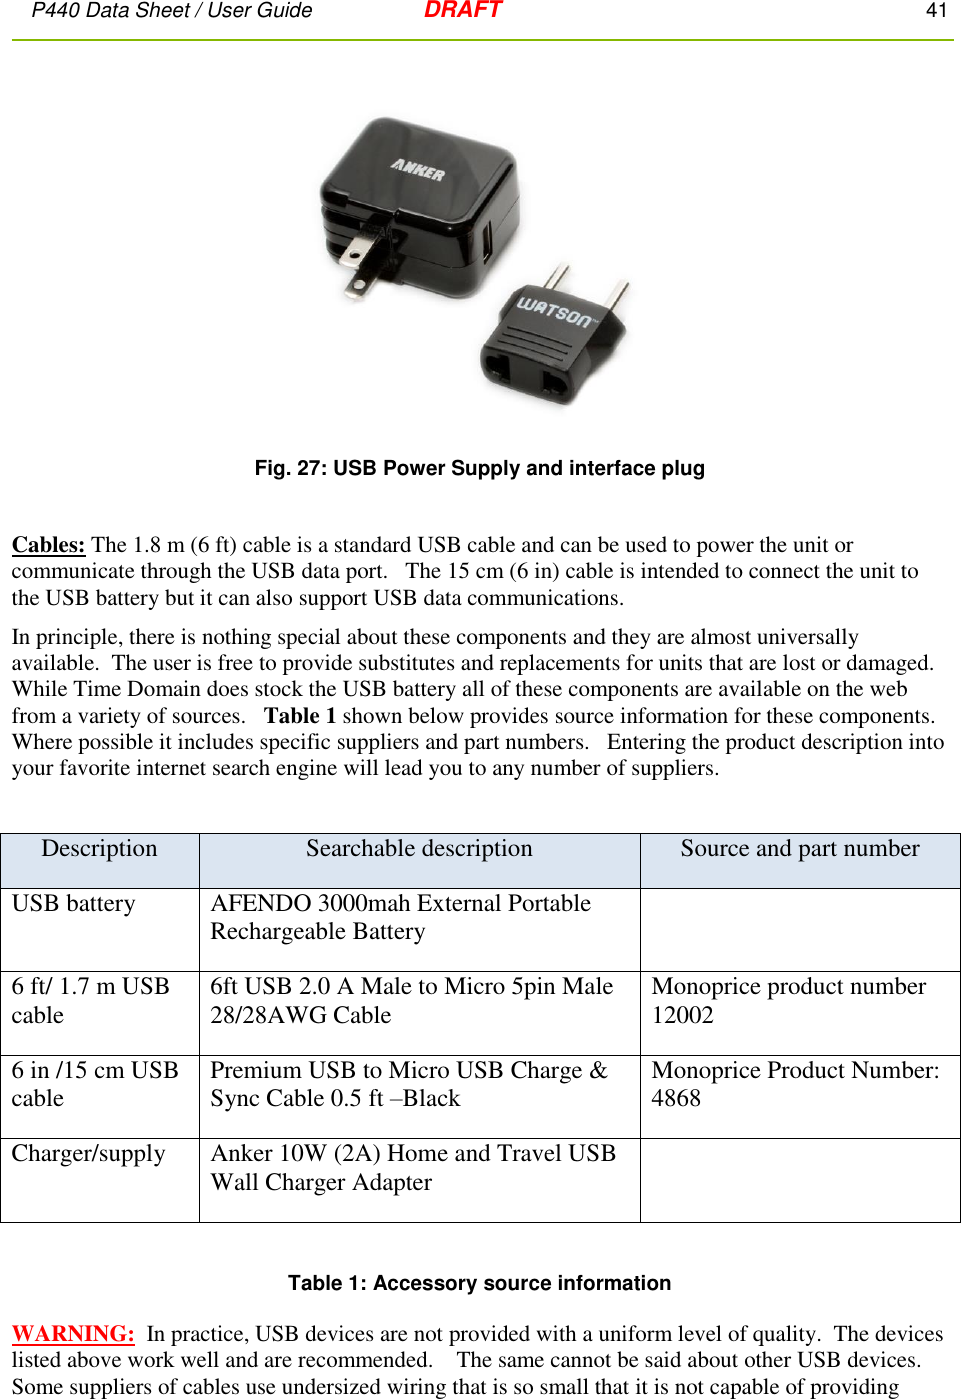 P440 Data Sheet / User Guide   DRAFT    41          Fig. 27: USB Power Supply and interface plug  Cables: The 1.8 m (6 ft) cable is a standard USB cable and can be used to power the unit or communicate through the USB data port.   The 15 cm (6 in) cable is intended to connect the unit to the USB battery but it can also support USB data communications. In principle, there is nothing special about these components and they are almost universally available.  The user is free to provide substitutes and replacements for units that are lost or damaged.  While Time Domain does stock the USB battery all of these components are available on the web from a variety of sources.   Table 1 shown below provides source information for these components.   Where possible it includes specific suppliers and part numbers.   Entering the product description into your favorite internet search engine will lead you to any number of suppliers.  Description Searchable description Source and part number USB battery AFENDO 3000mah External Portable Rechargeable Battery  6 ft/ 1.7 m USB cable 6ft USB 2.0 A Male to Micro 5pin Male 28/28AWG Cable Monoprice product number 12002 6 in /15 cm USB cable Premium USB to Micro USB Charge &amp; Sync Cable 0.5 ft –Black Monoprice Product Number: 4868 Charger/supply Anker 10W (2A) Home and Travel USB Wall Charger Adapter   Table 1: Accessory source information WARNING:  In practice, USB devices are not provided with a uniform level of quality.  The devices listed above work well and are recommended.    The same cannot be said about other USB devices.  Some suppliers of cables use undersized wiring that is so small that it is not capable of providing 